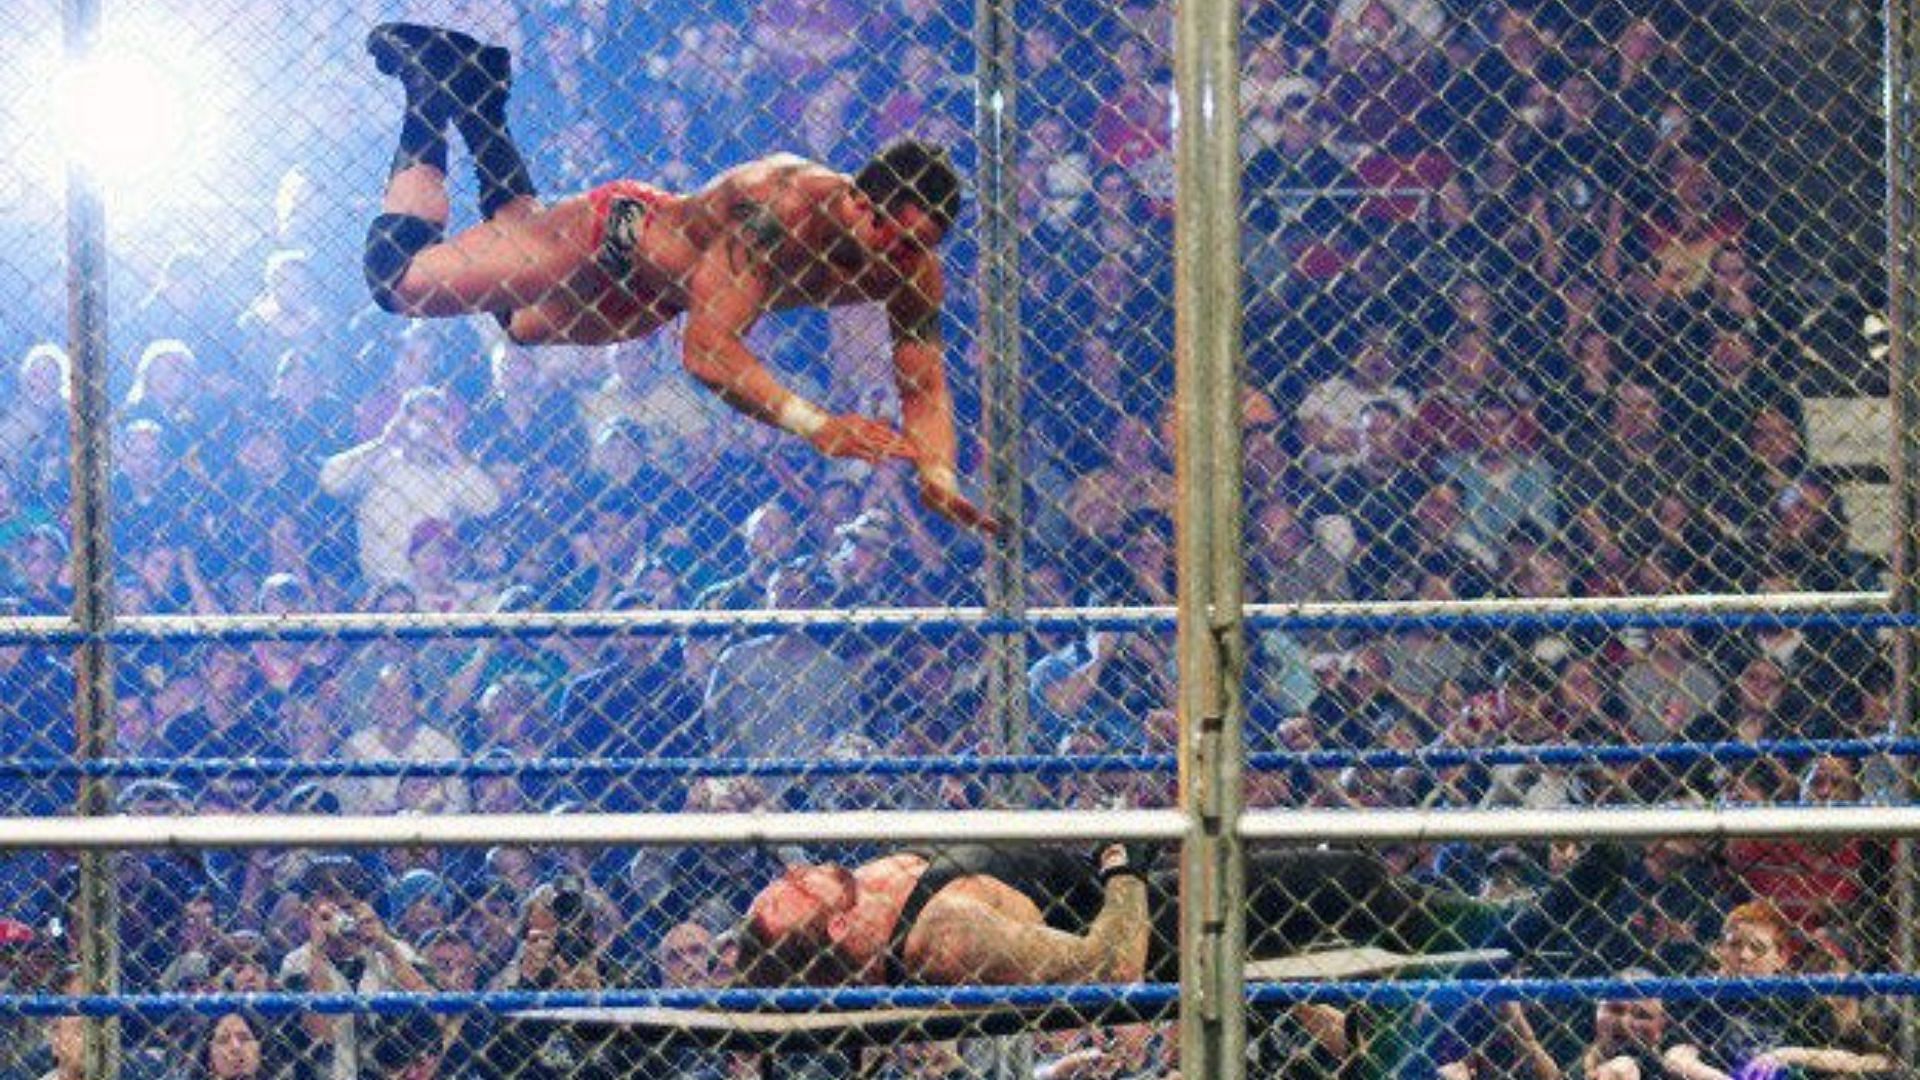 The Undertaker and Randy Orton capped off their legendary rivalry at Armageddon 2005